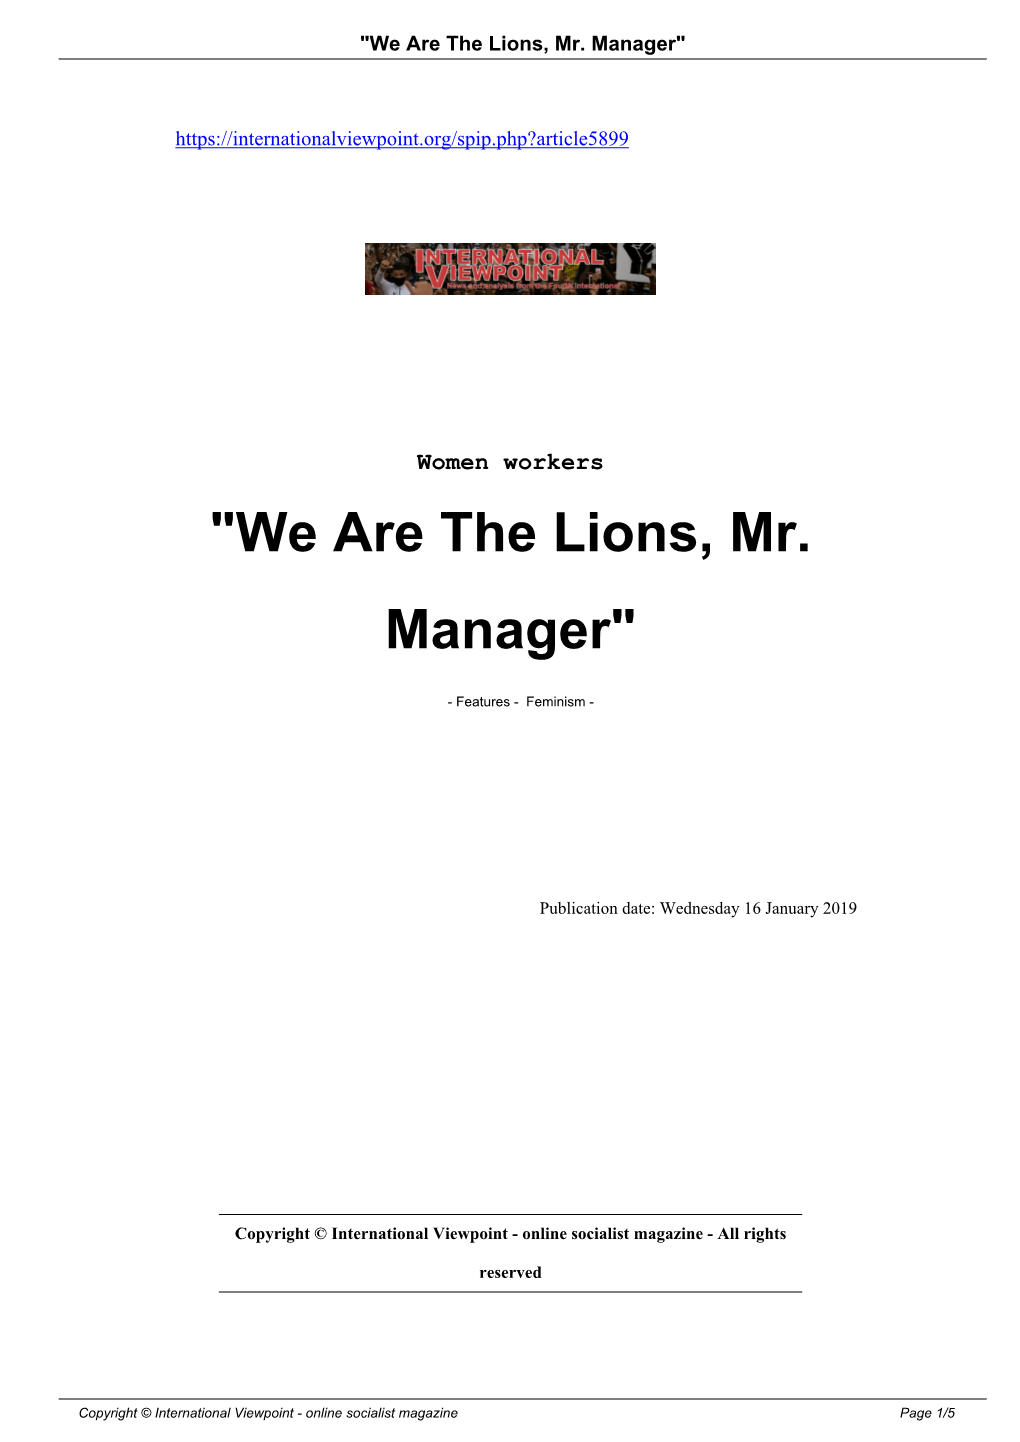 "We Are the Lions, Mr. Manager"